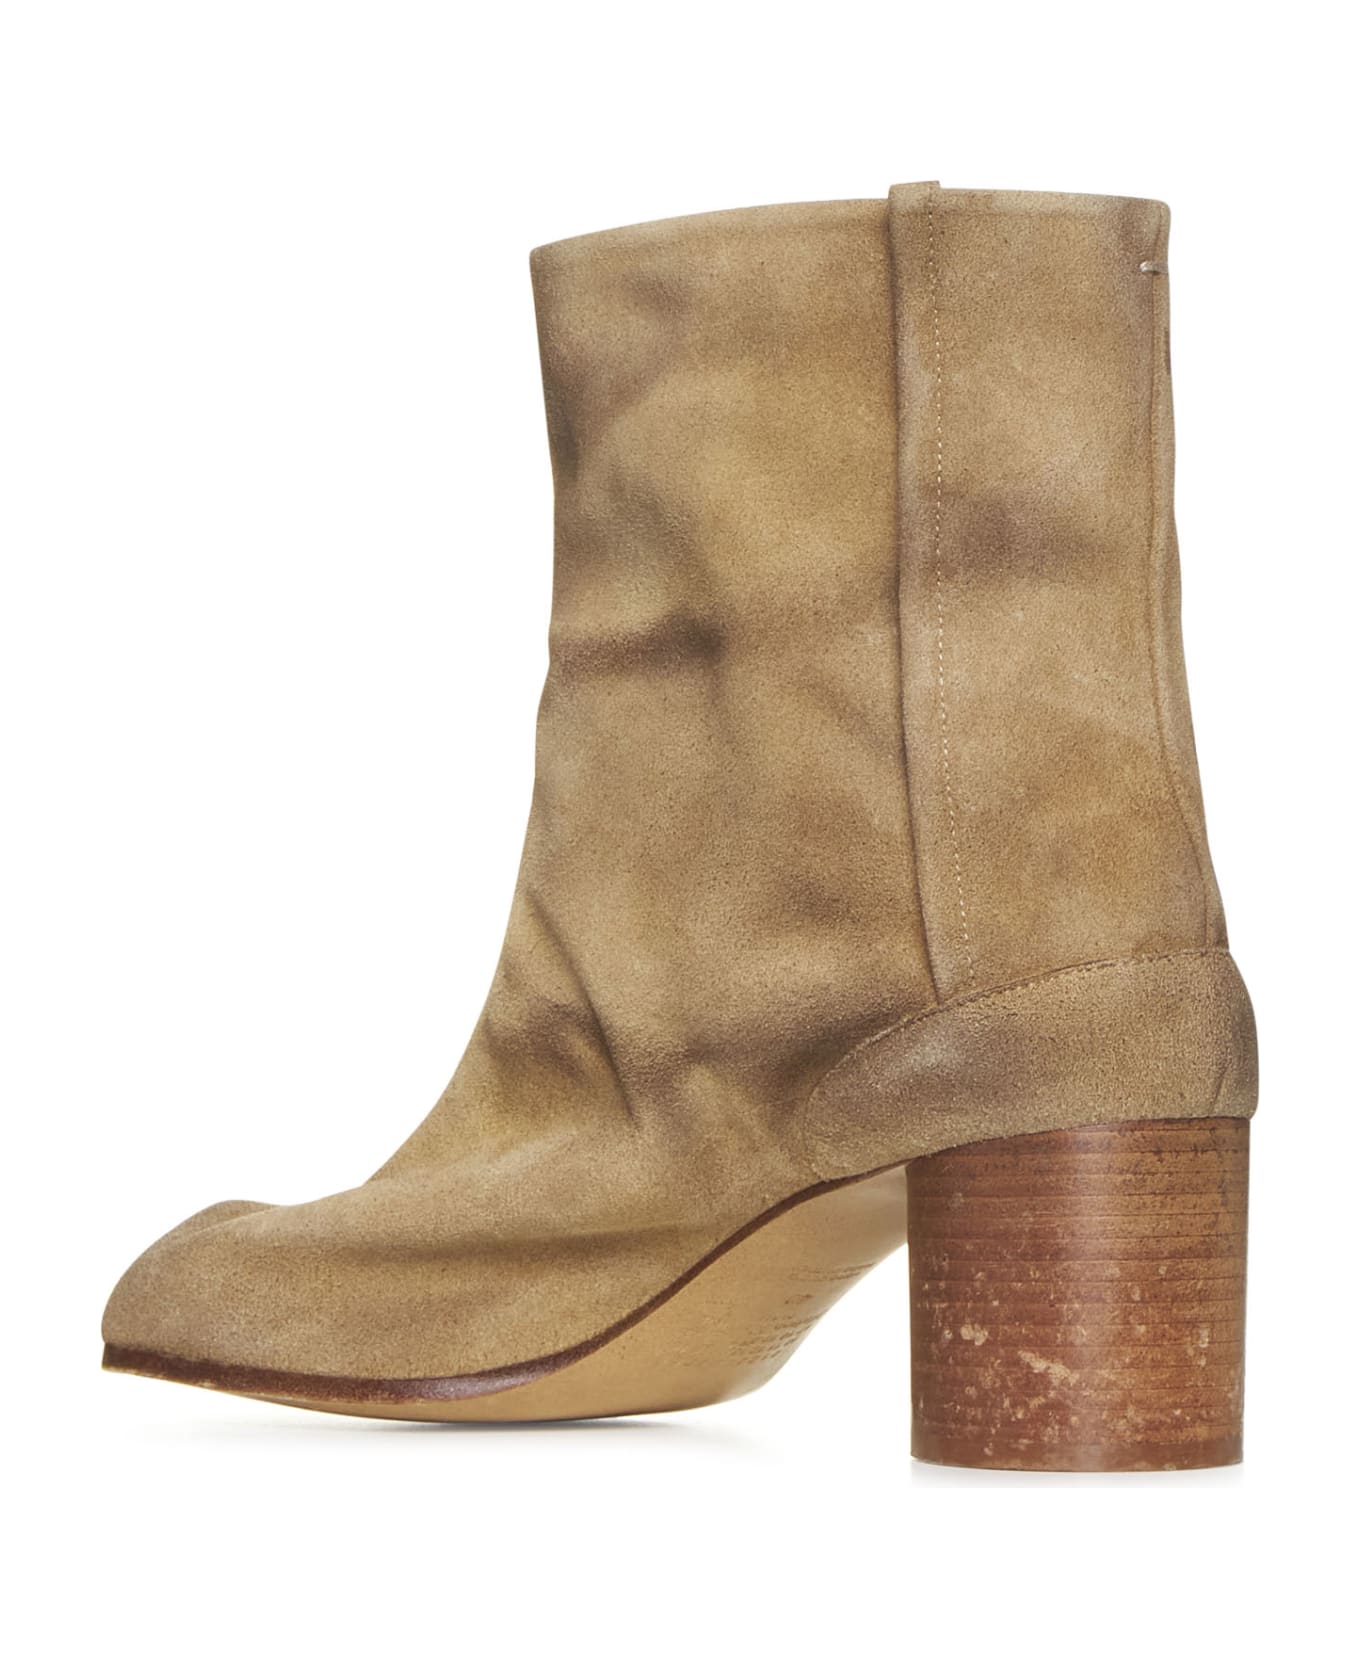 Maison Margiela Tabi Ankle Boots In Camel Suede - Beige ブーツ